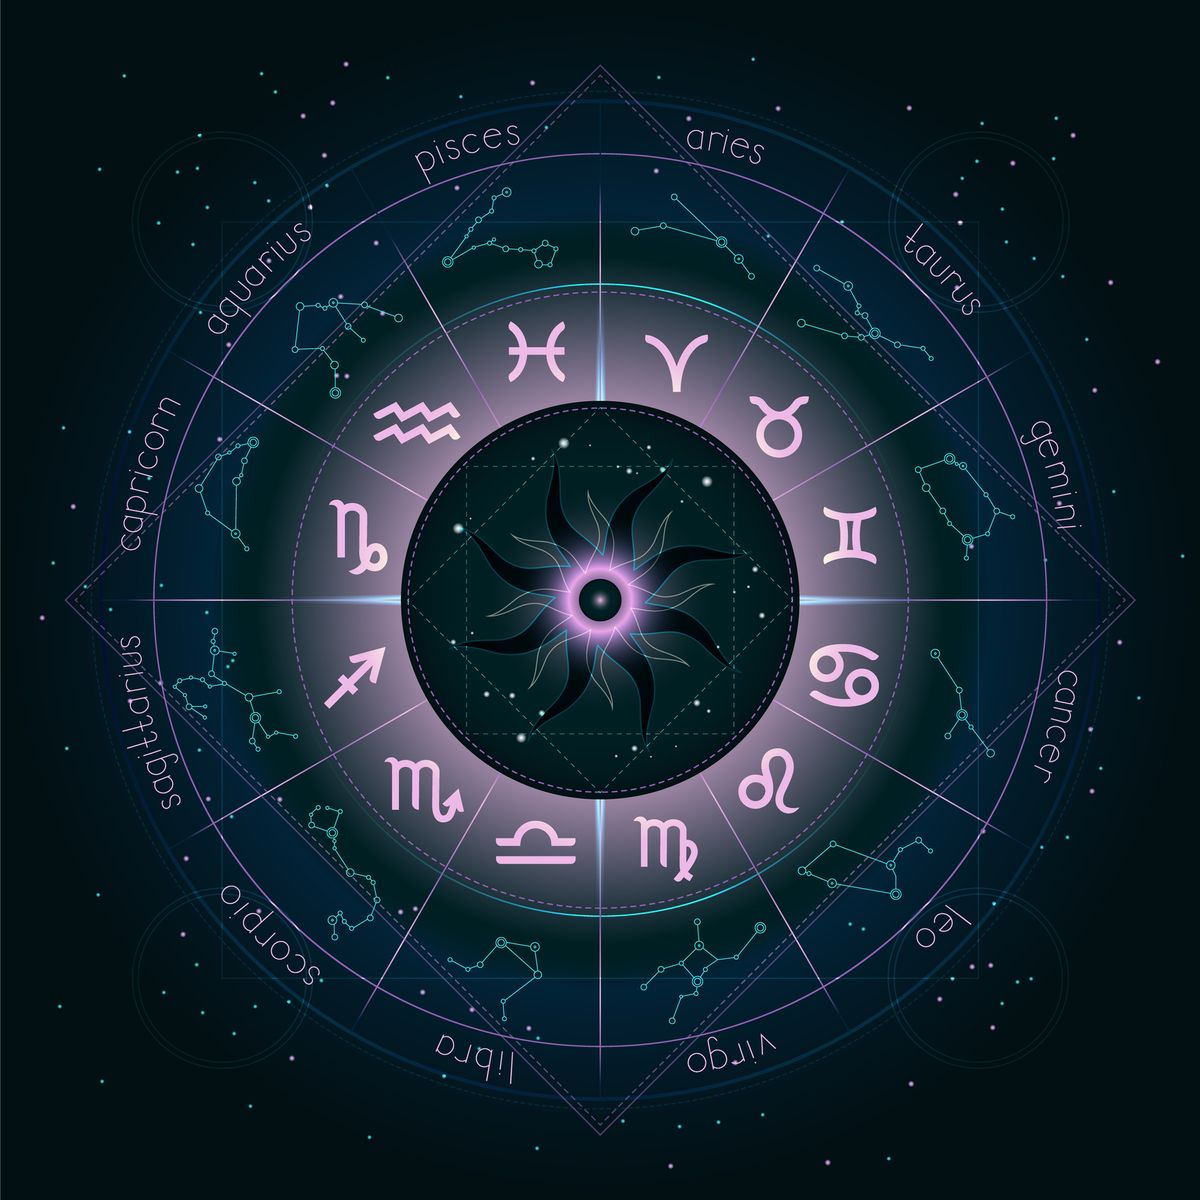 illustration with horoscope circle, zodiac symbols and astrology constellations on the starry night sky background with geometry pattern pink and turquoise elements vector